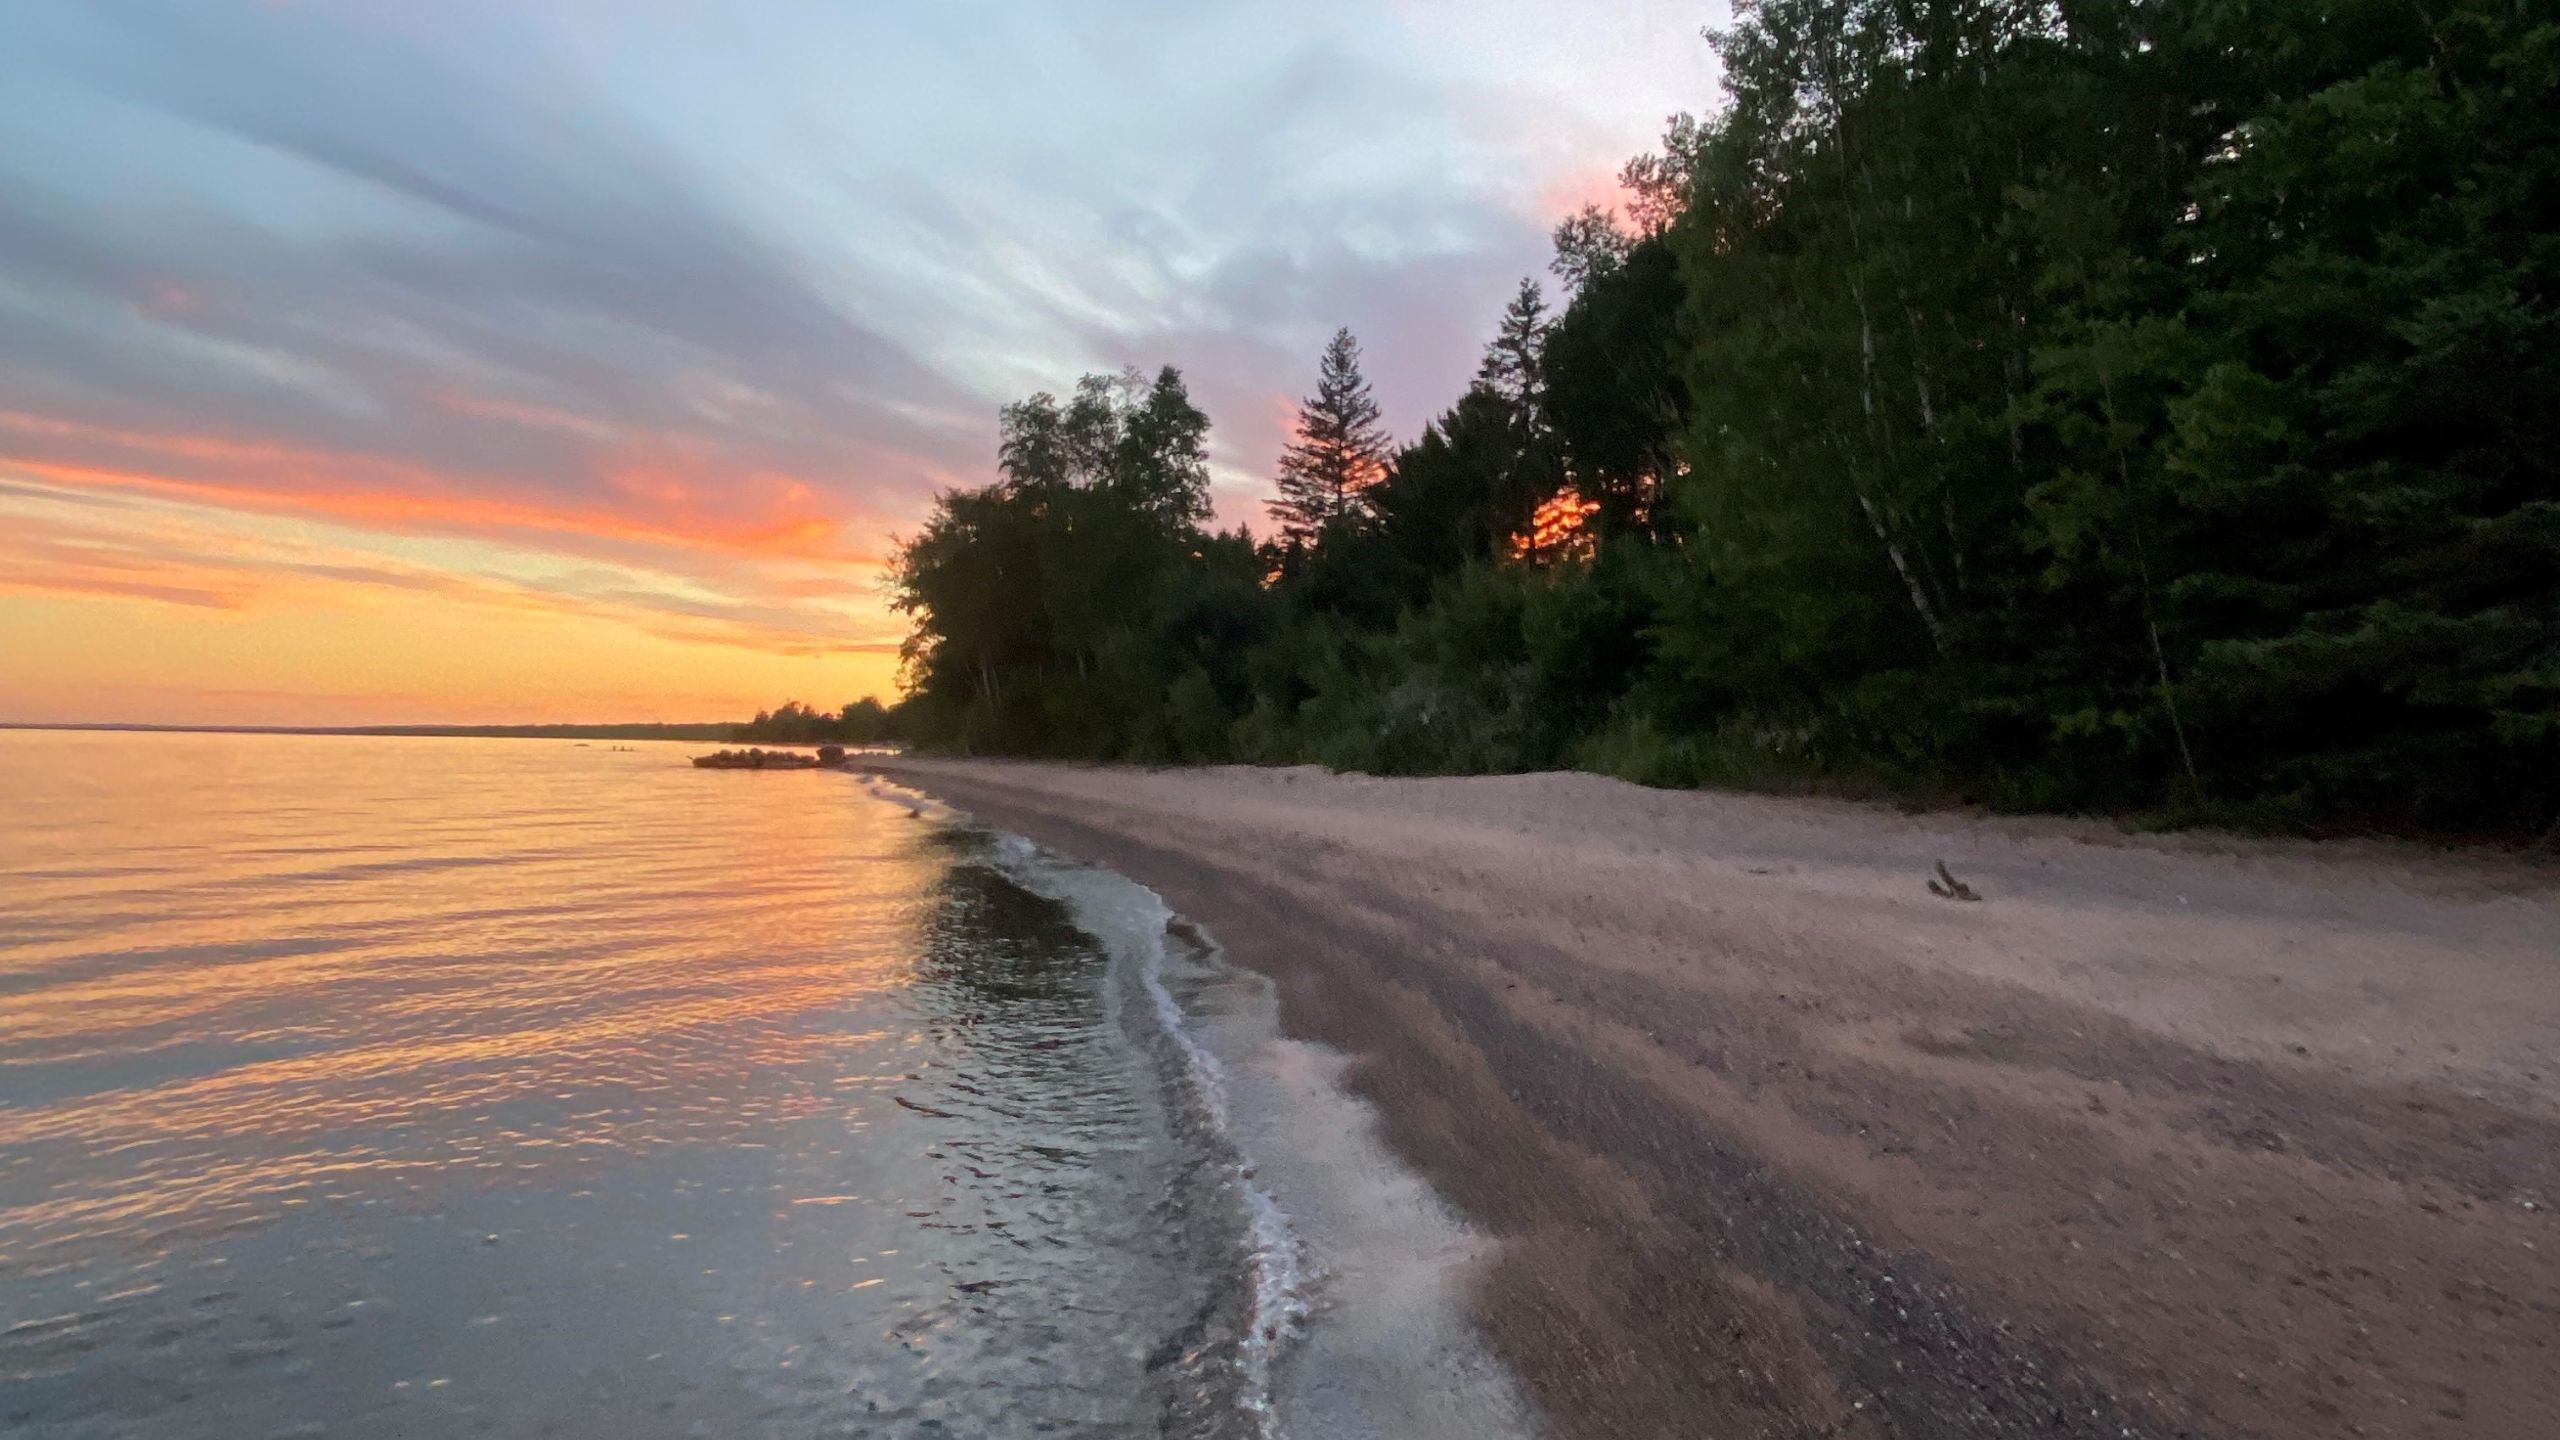 what's the story - red and yellow sunset over water on sandy lake beach, trees and blue clouds